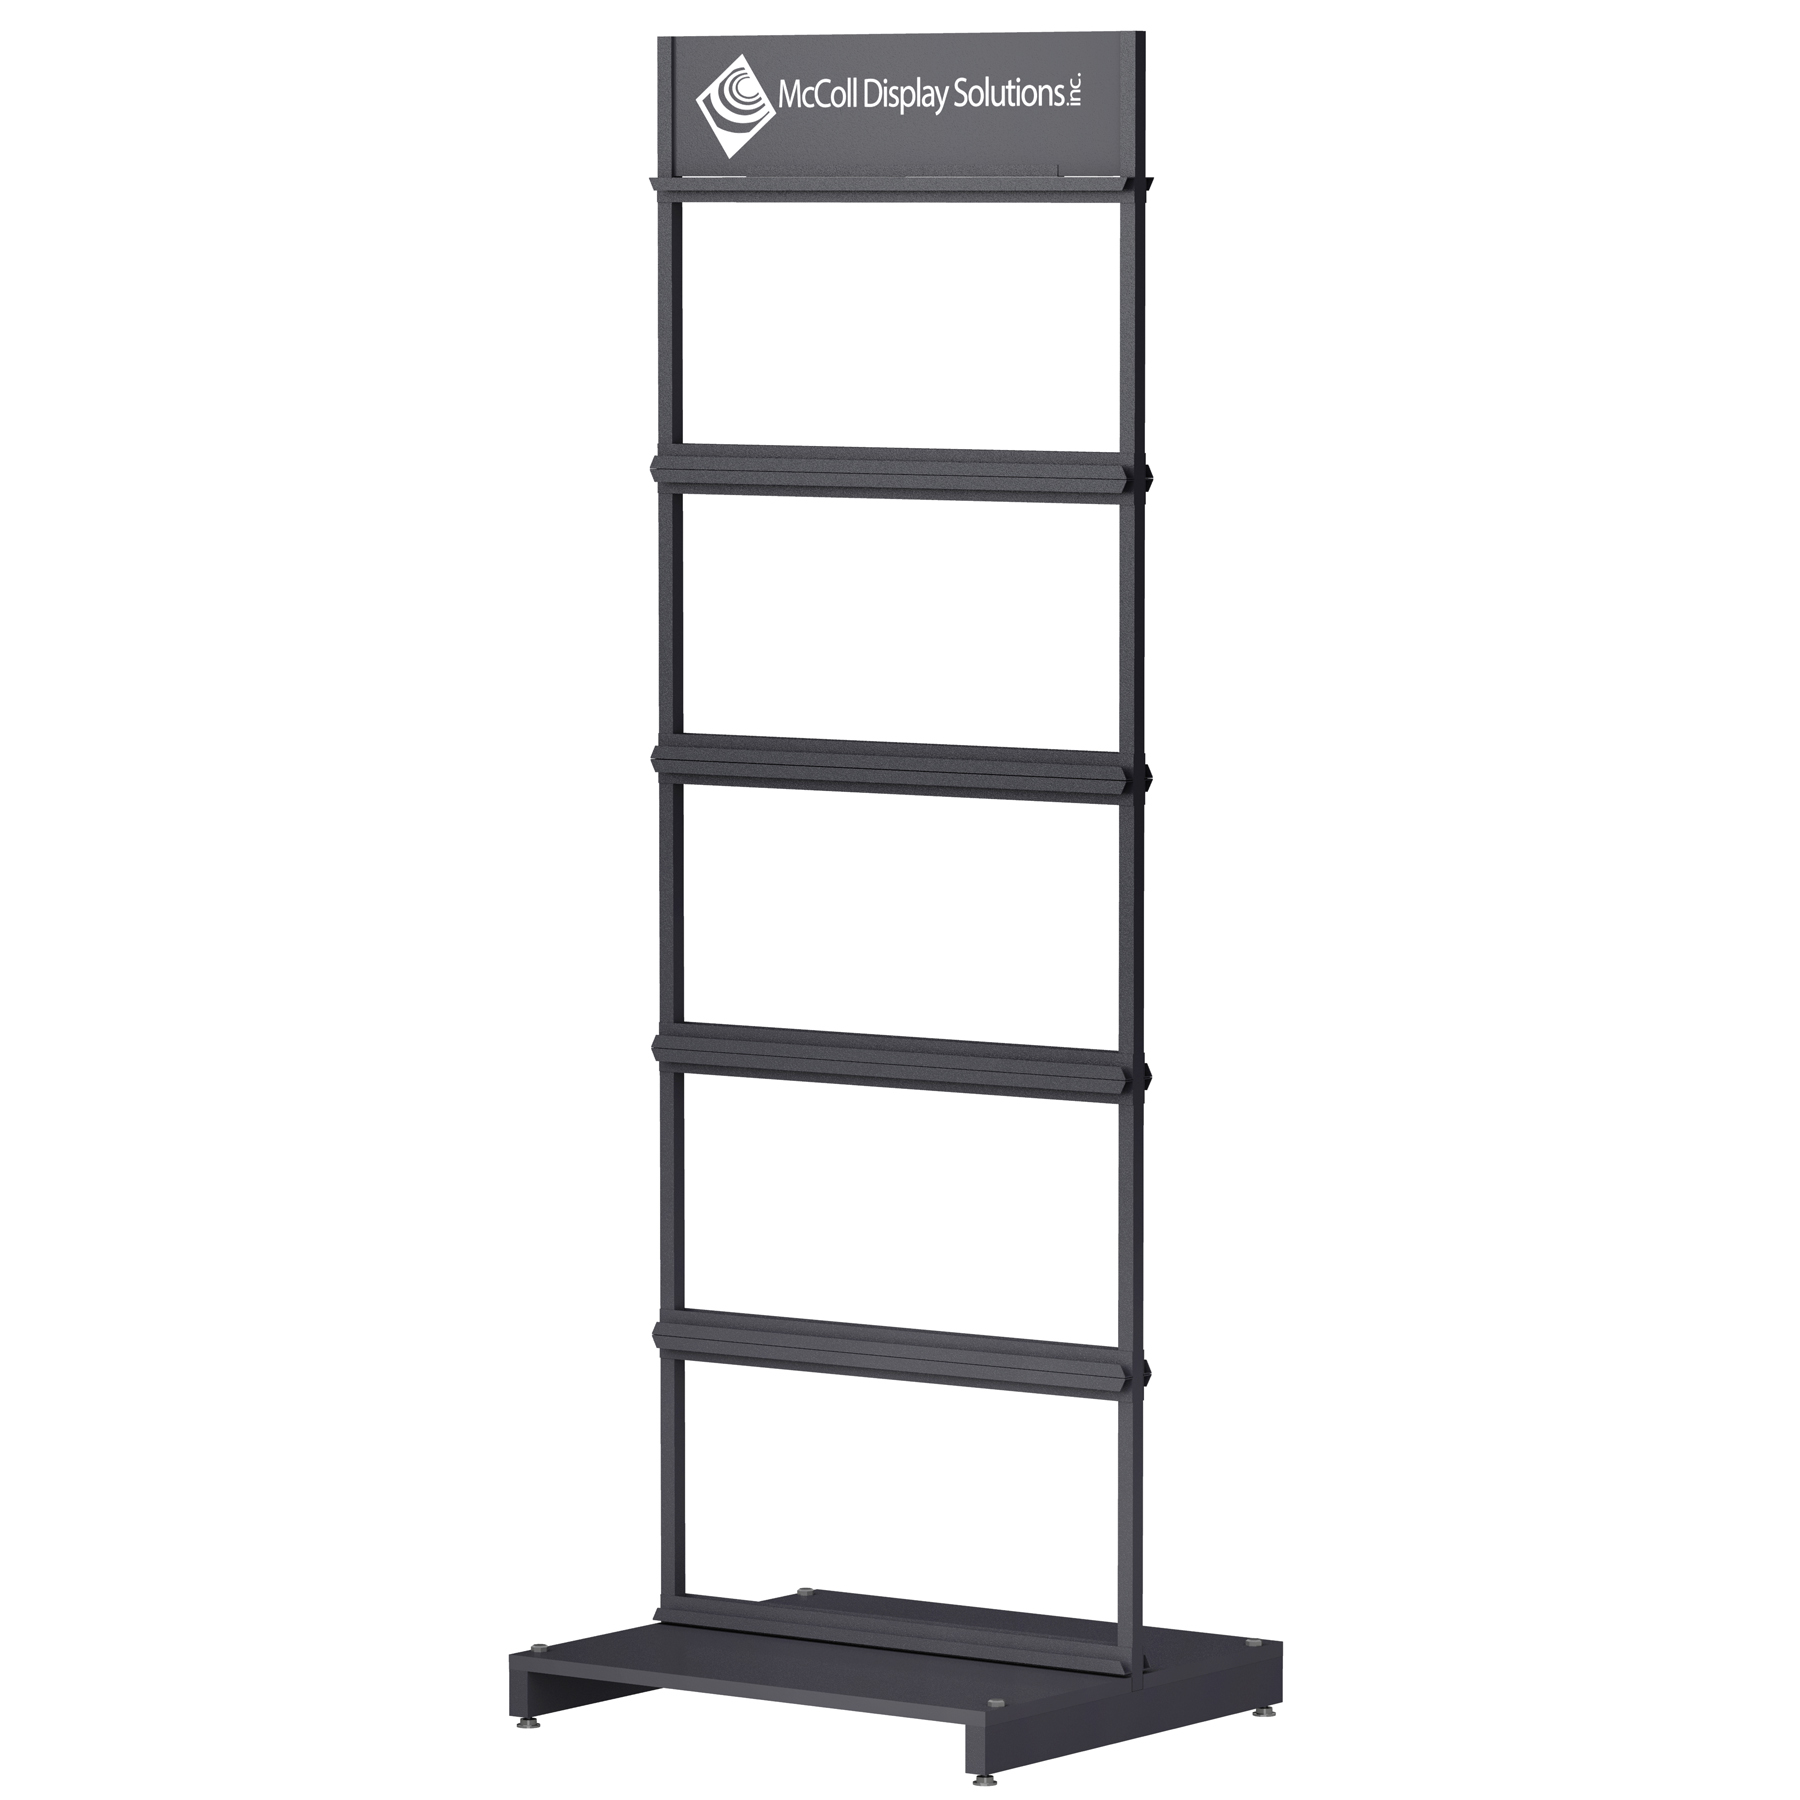 Customizable Easy Assembly Steel Rack Channel System Custom Colors and Optional Screen Printed or Full Color Signage Available